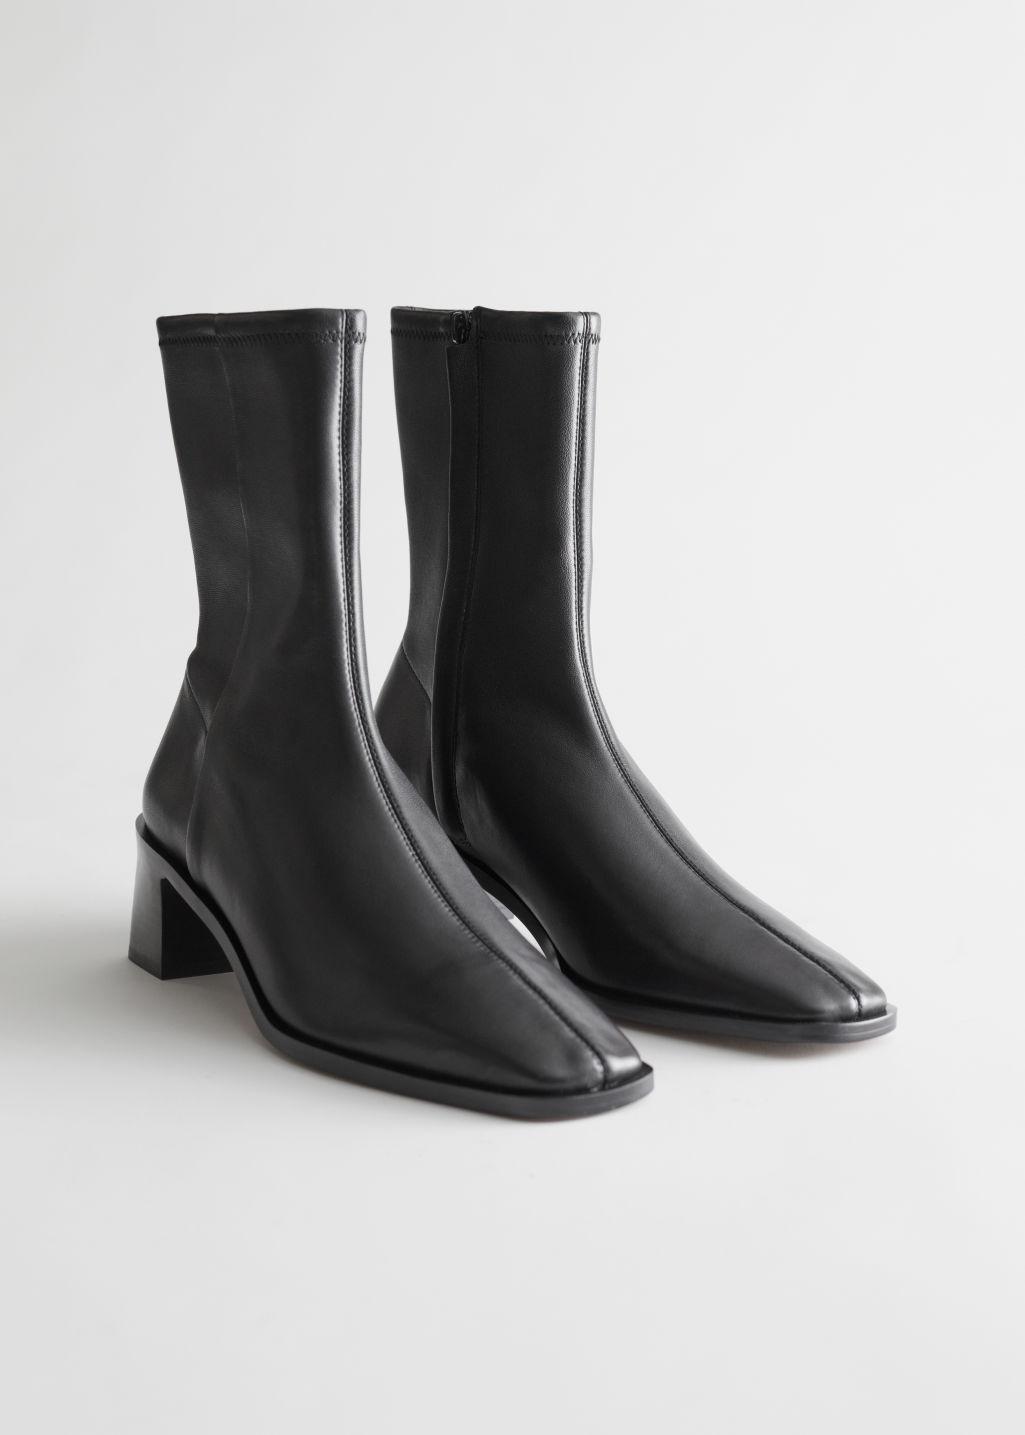 Zeggen traagheid gids & Other Stories Squared Toe Leather Sock Boots in Black | Lyst